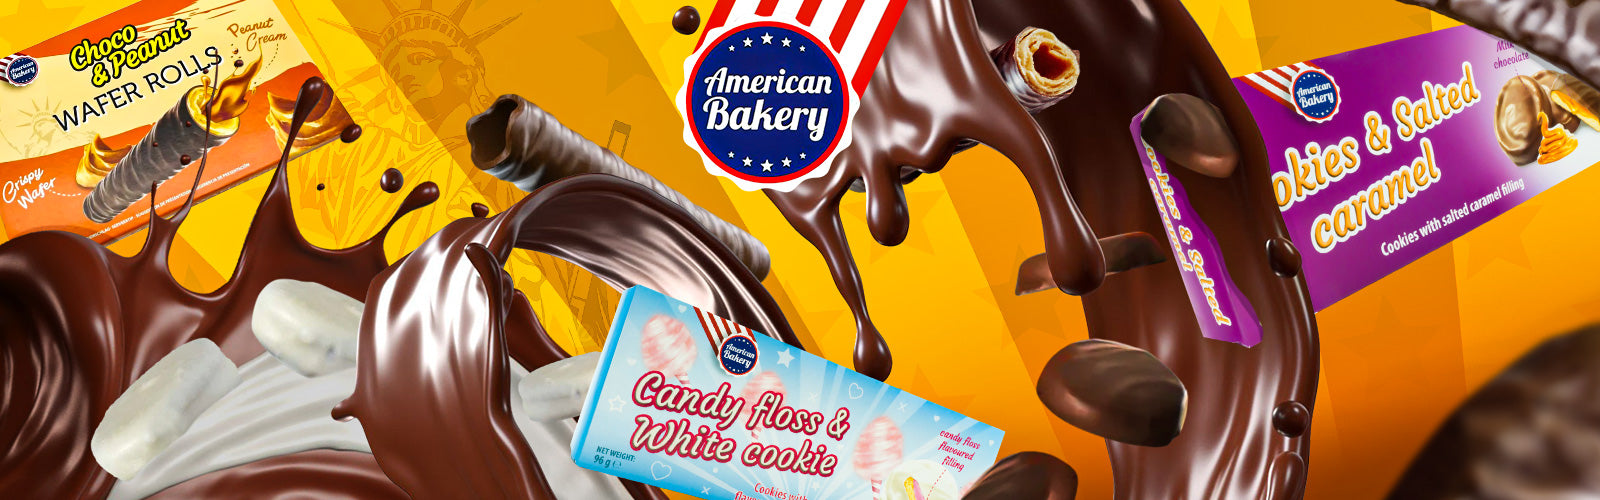 American Bakery collection banner